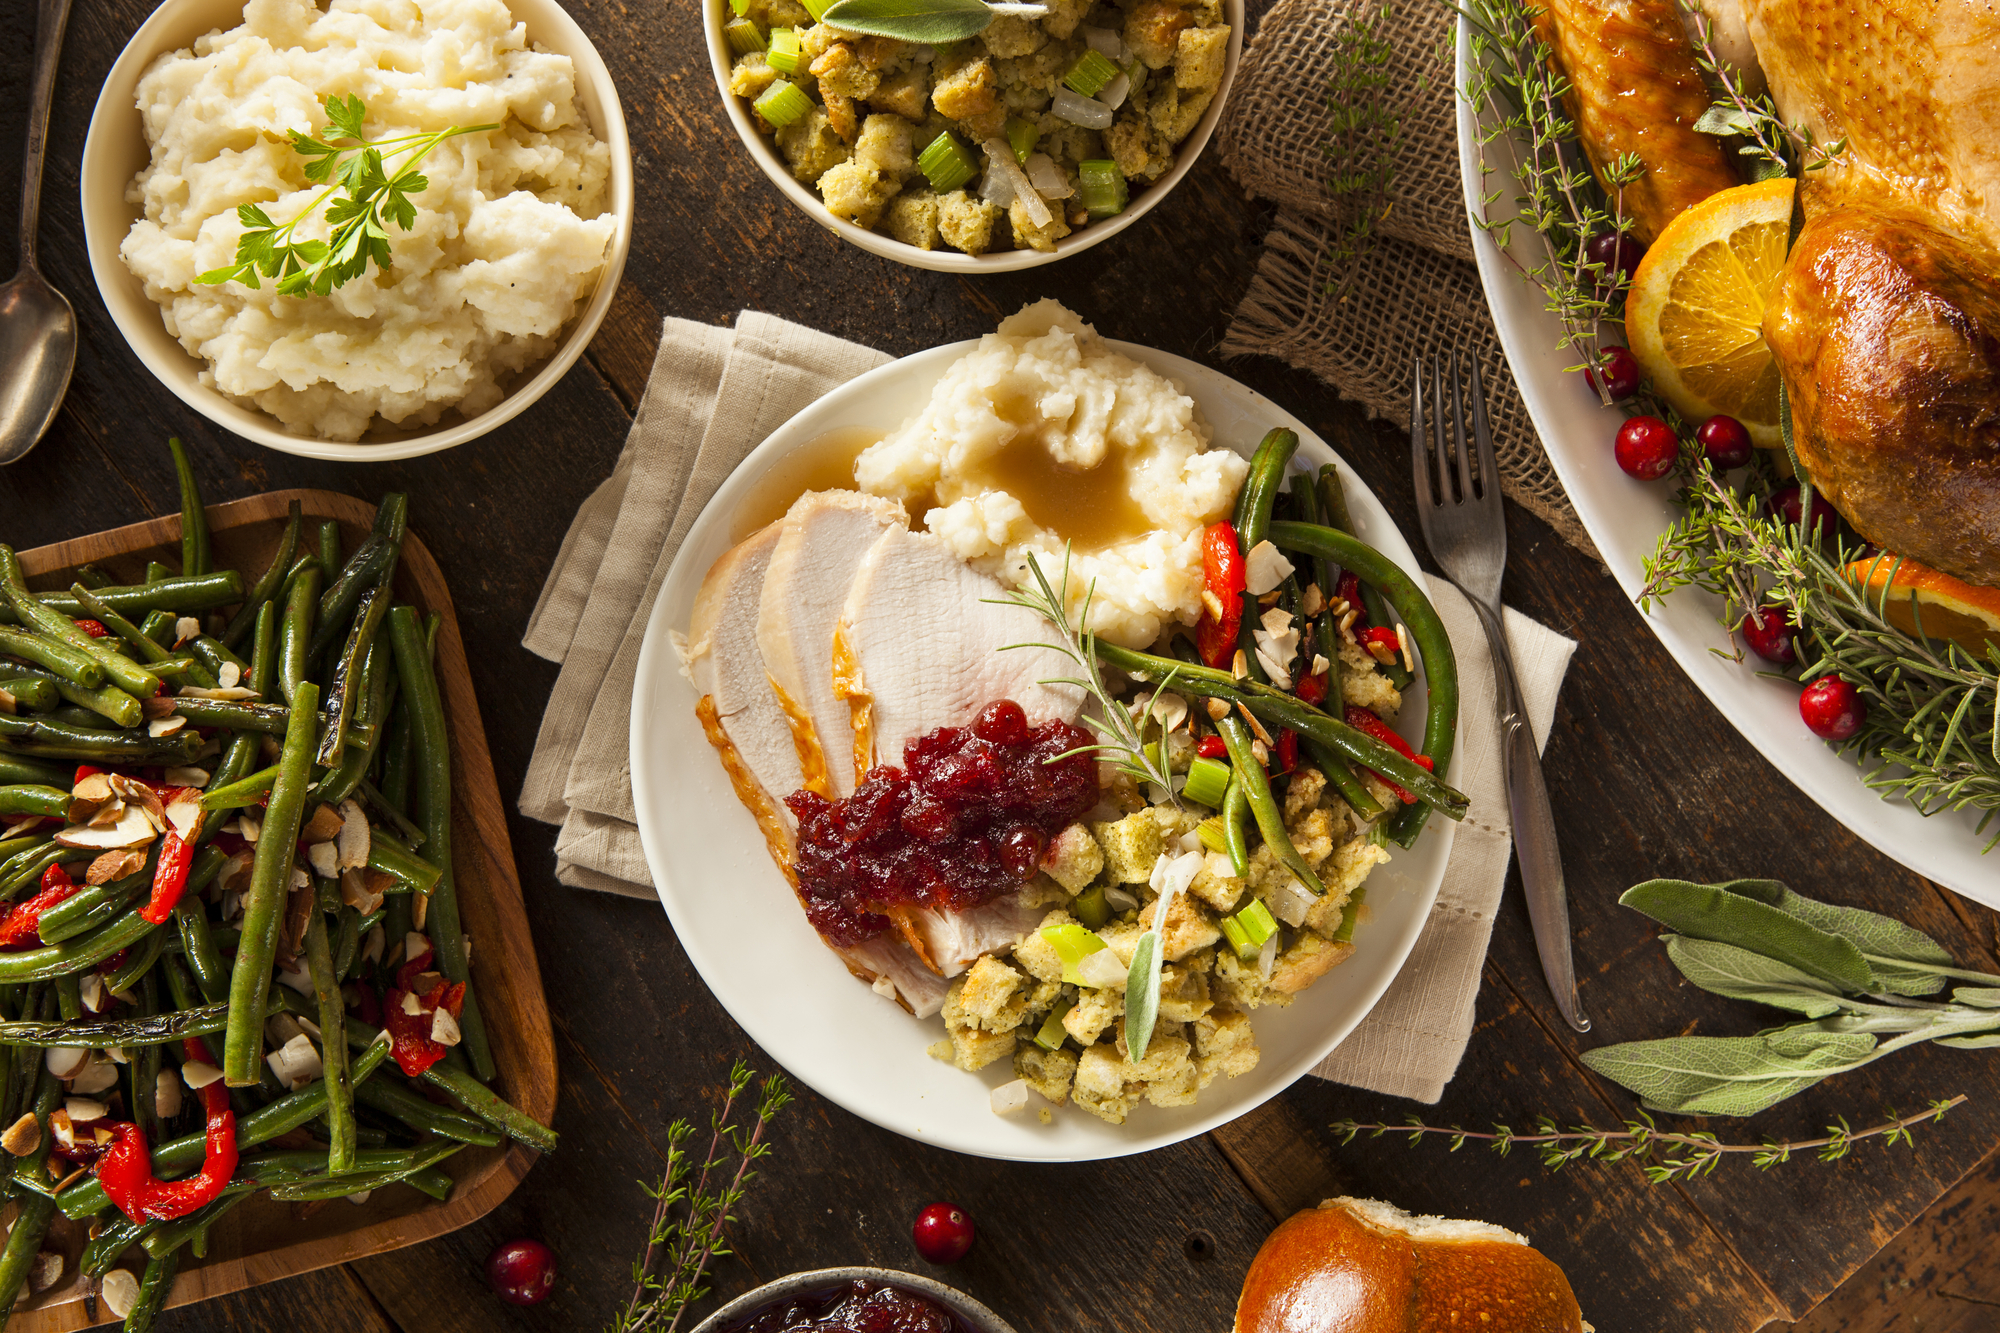 Where to order Thanksgiving meals in the Fayetteville area in 2022